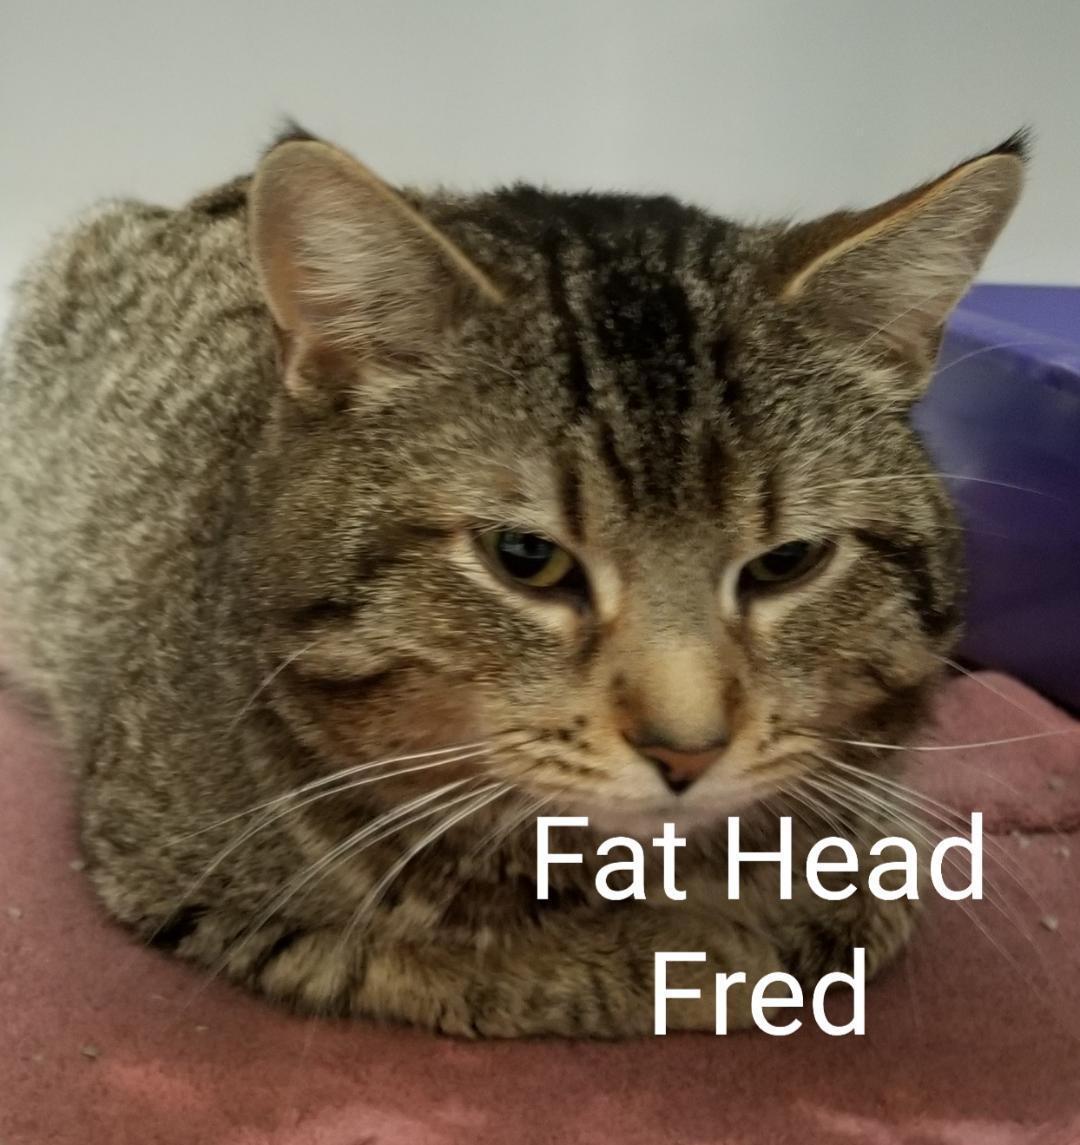 Fat Head Fred detail page